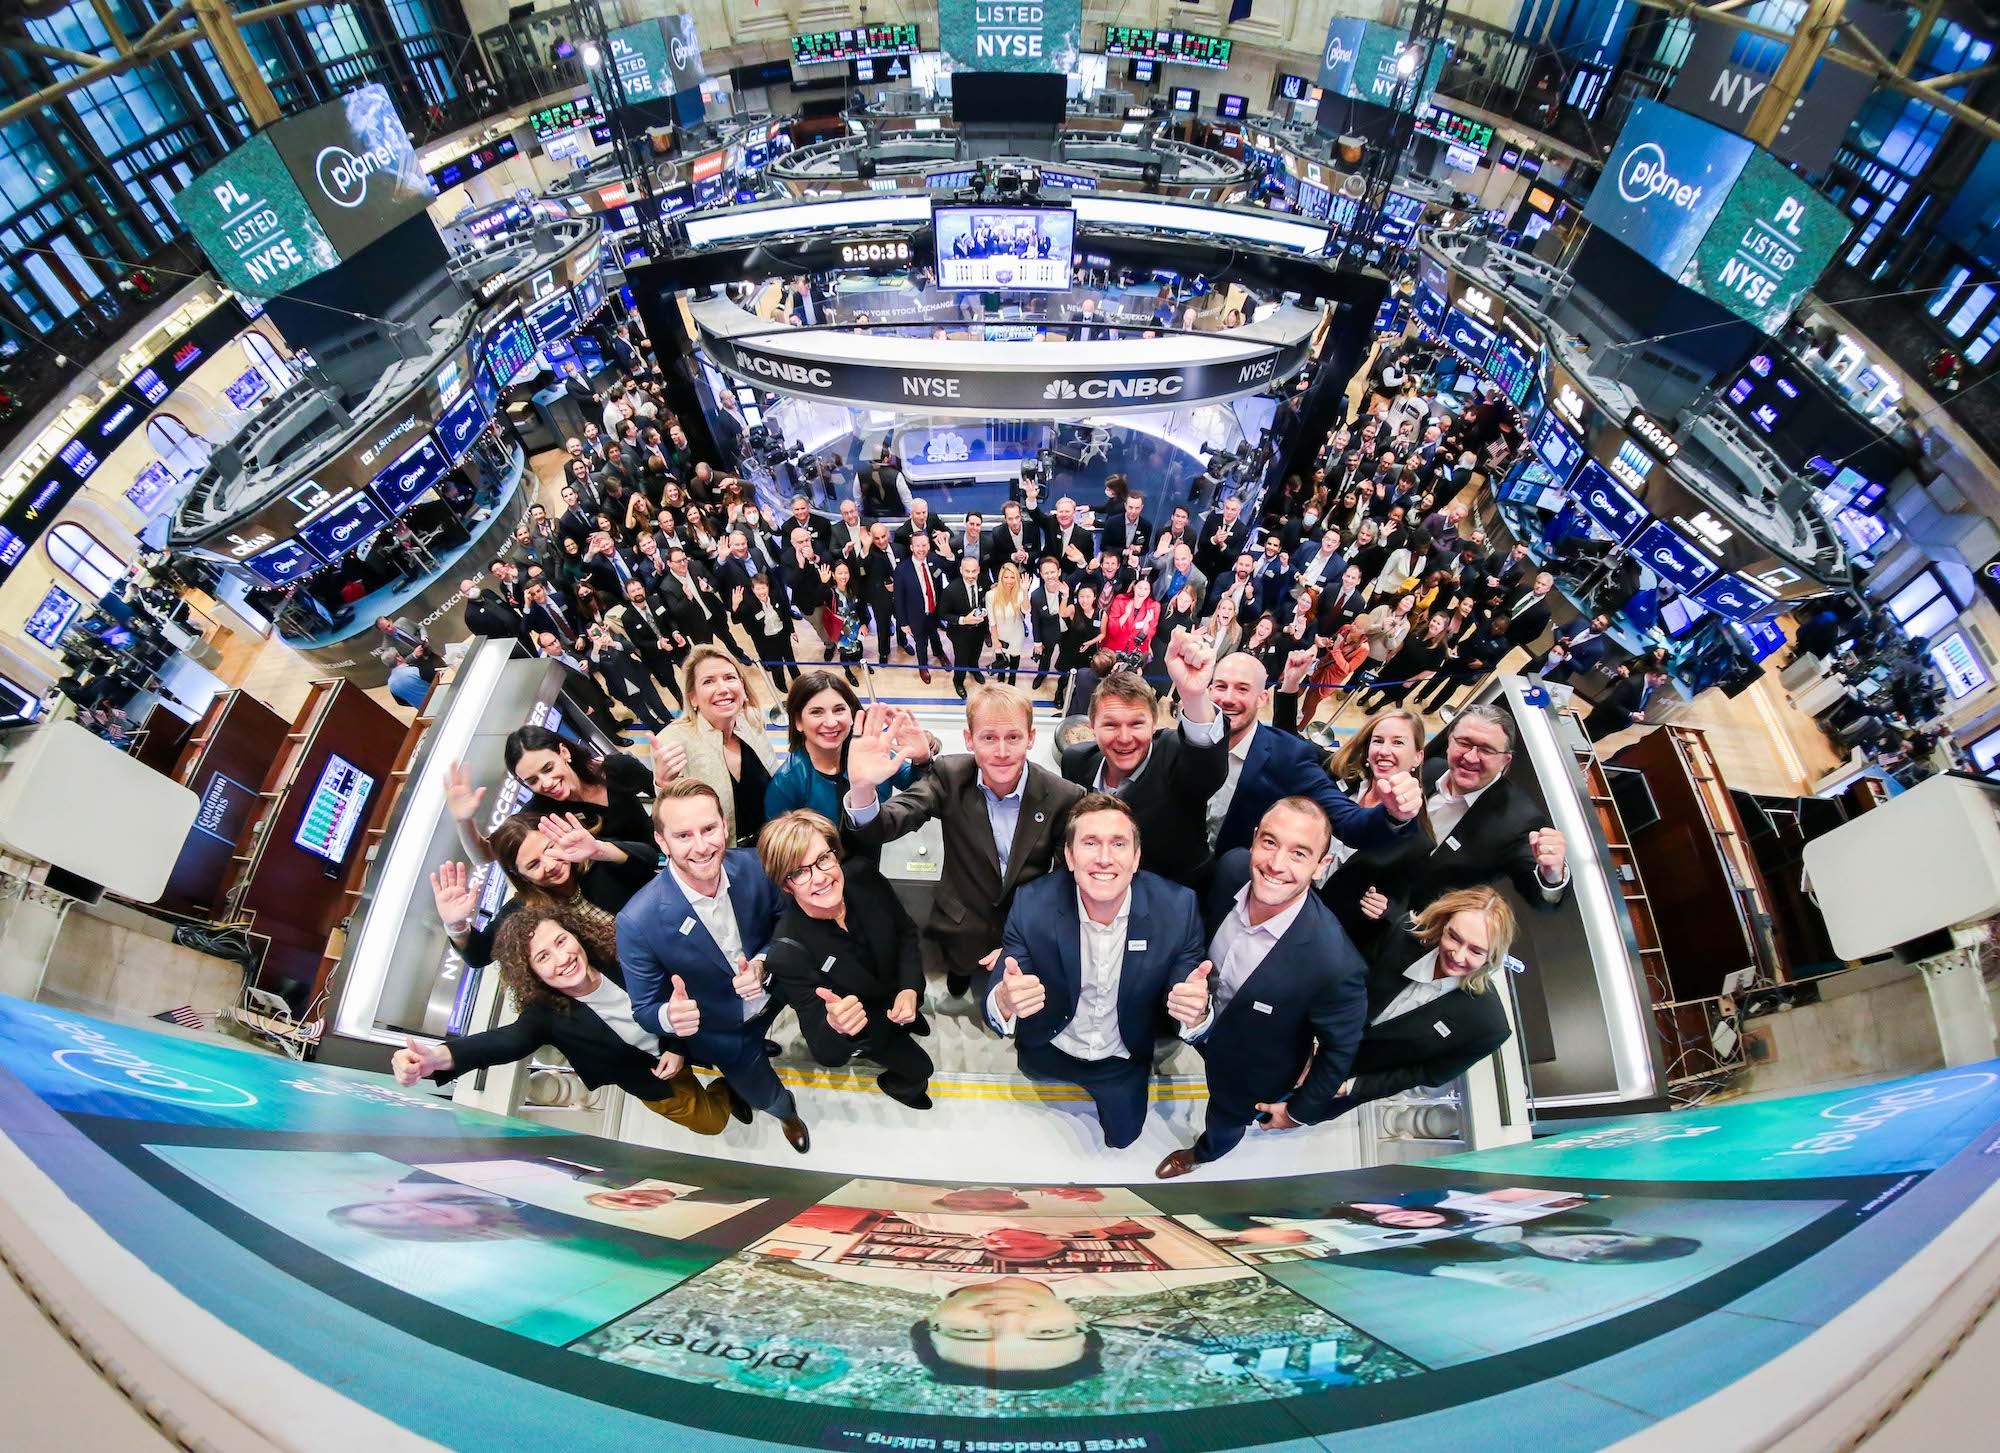 A panoramic photo of the Planet team members at a Nasdaq listing event.